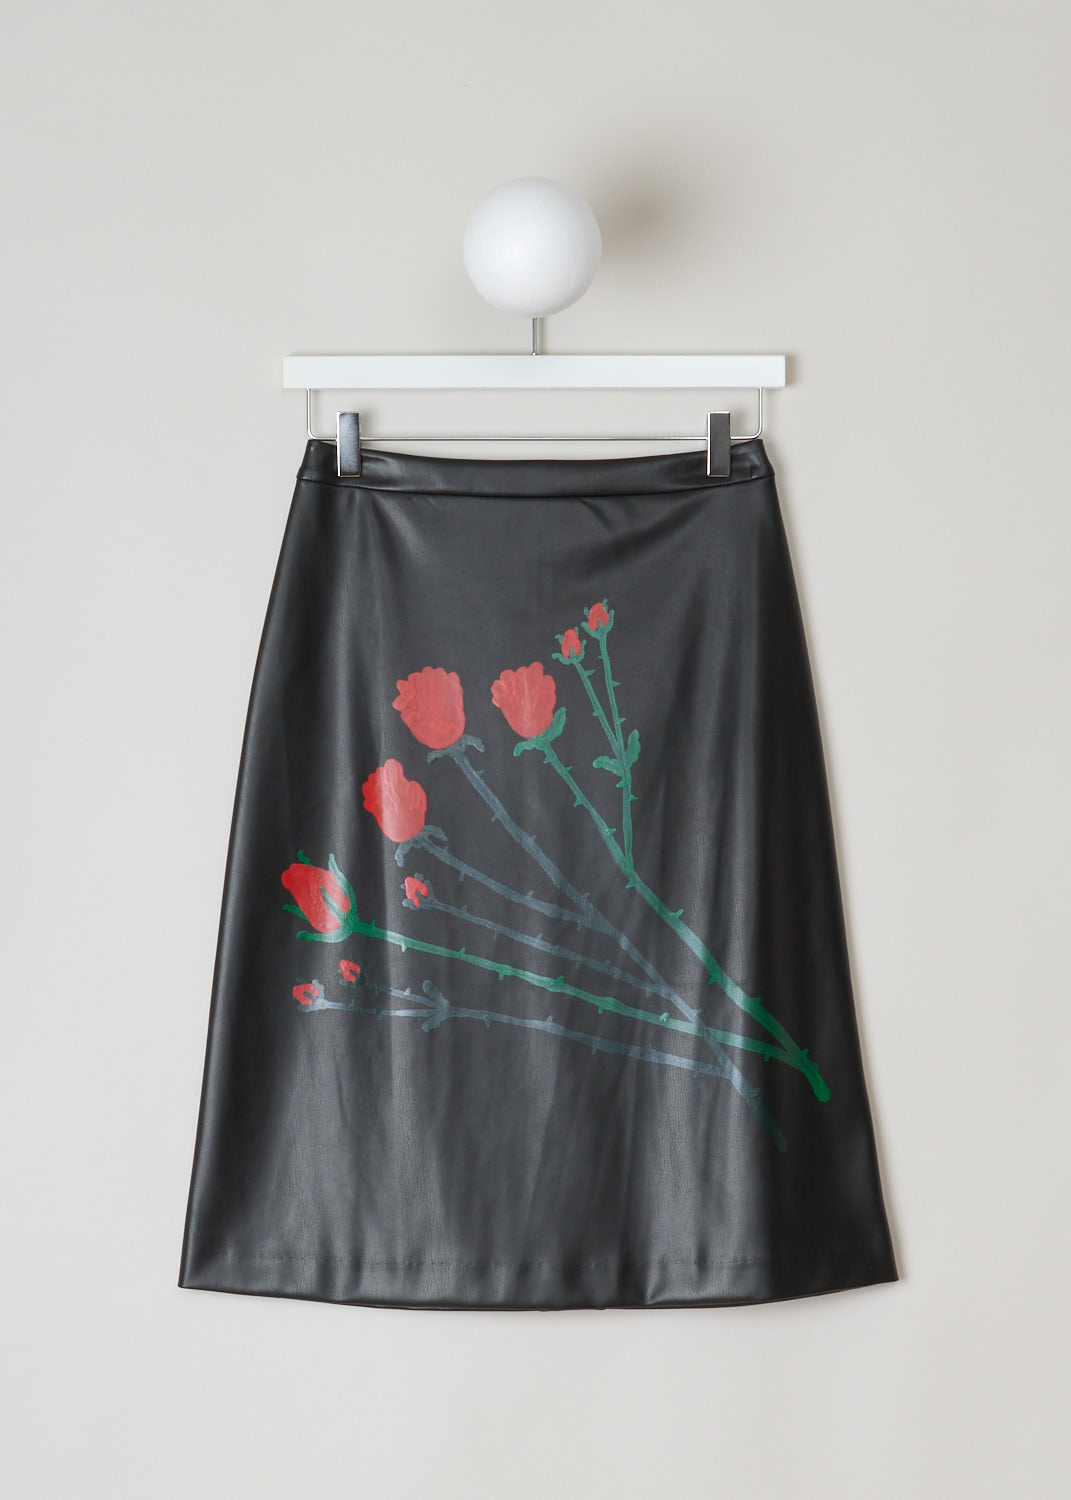 Bernadette, Black vegan leather a-line skirt, skirt_eva_vegan_leather_handpainted_red_rose_bouquet, black red green, front, You will not only look good but also do good, in this vegan leather skirt. Made into an a-line model with a concealed zip fastening option on the back. The red roses on the skirt are entirely hand painted which adds to the exclusivity. 